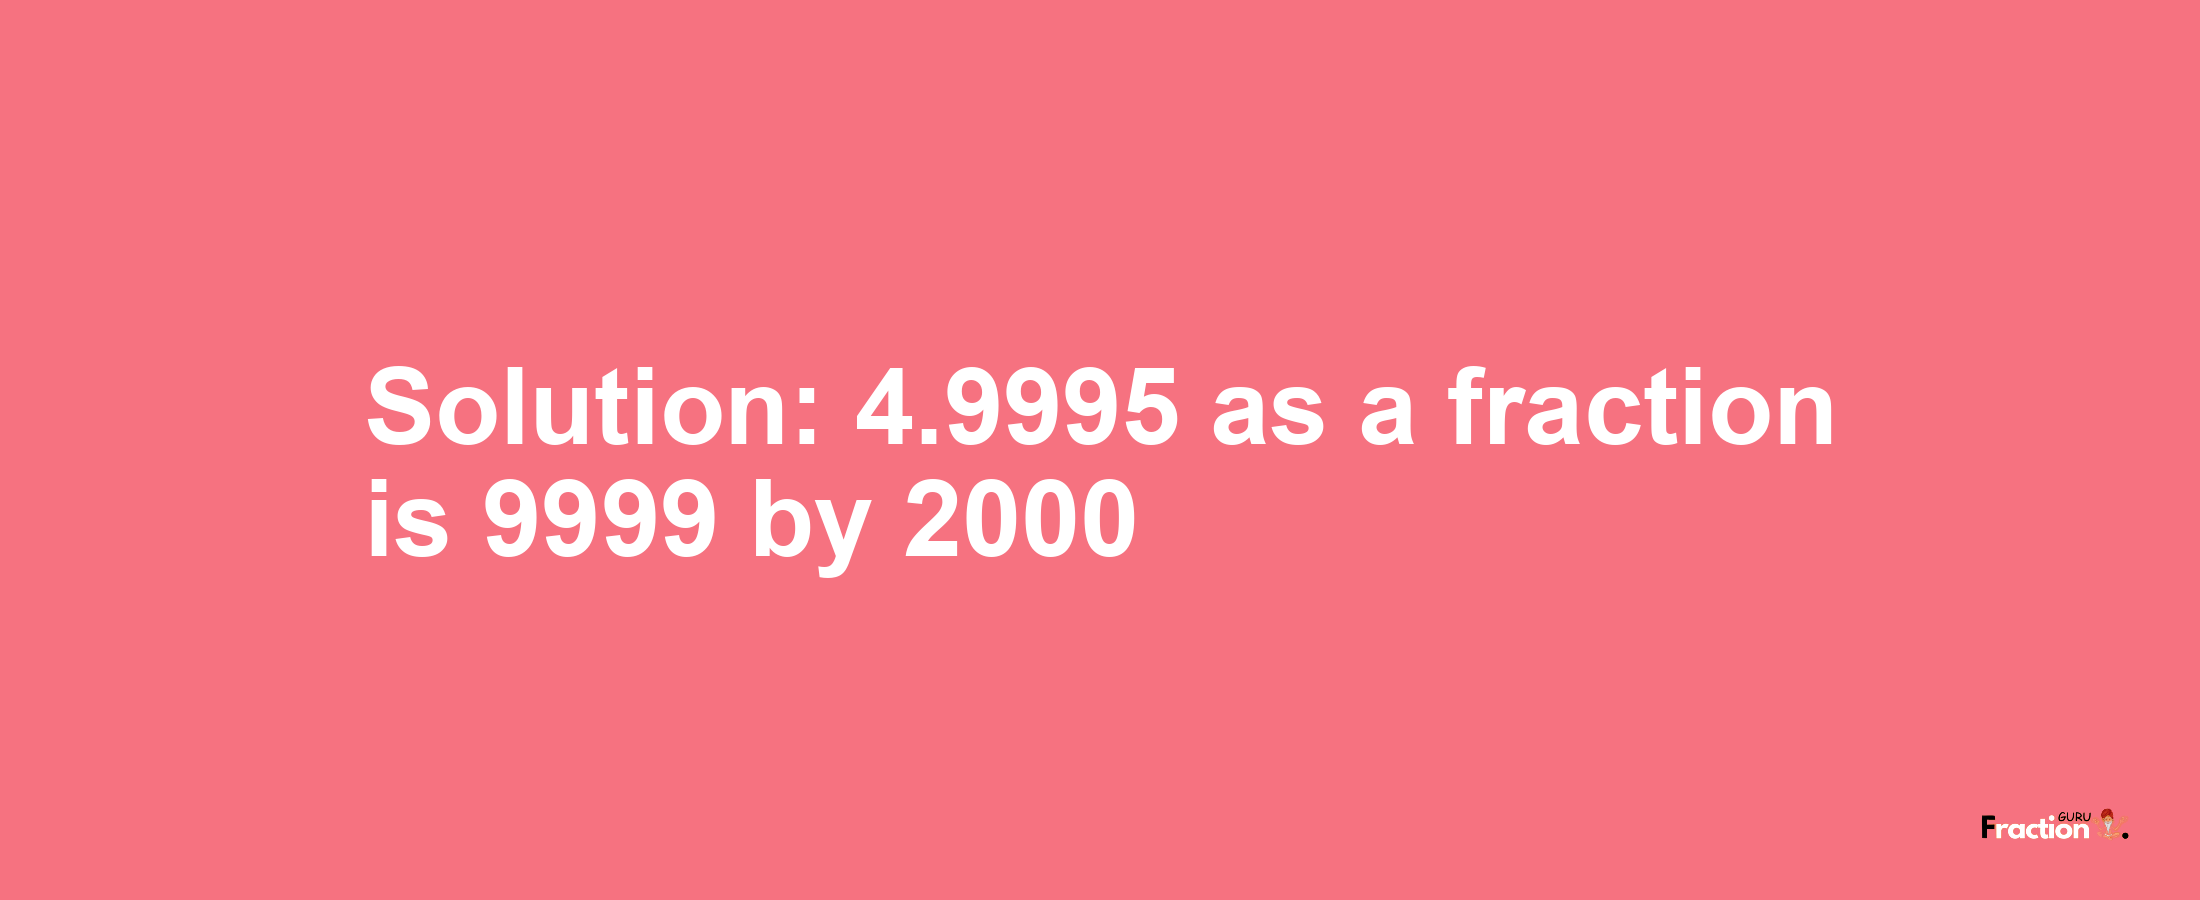 Solution:4.9995 as a fraction is 9999/2000